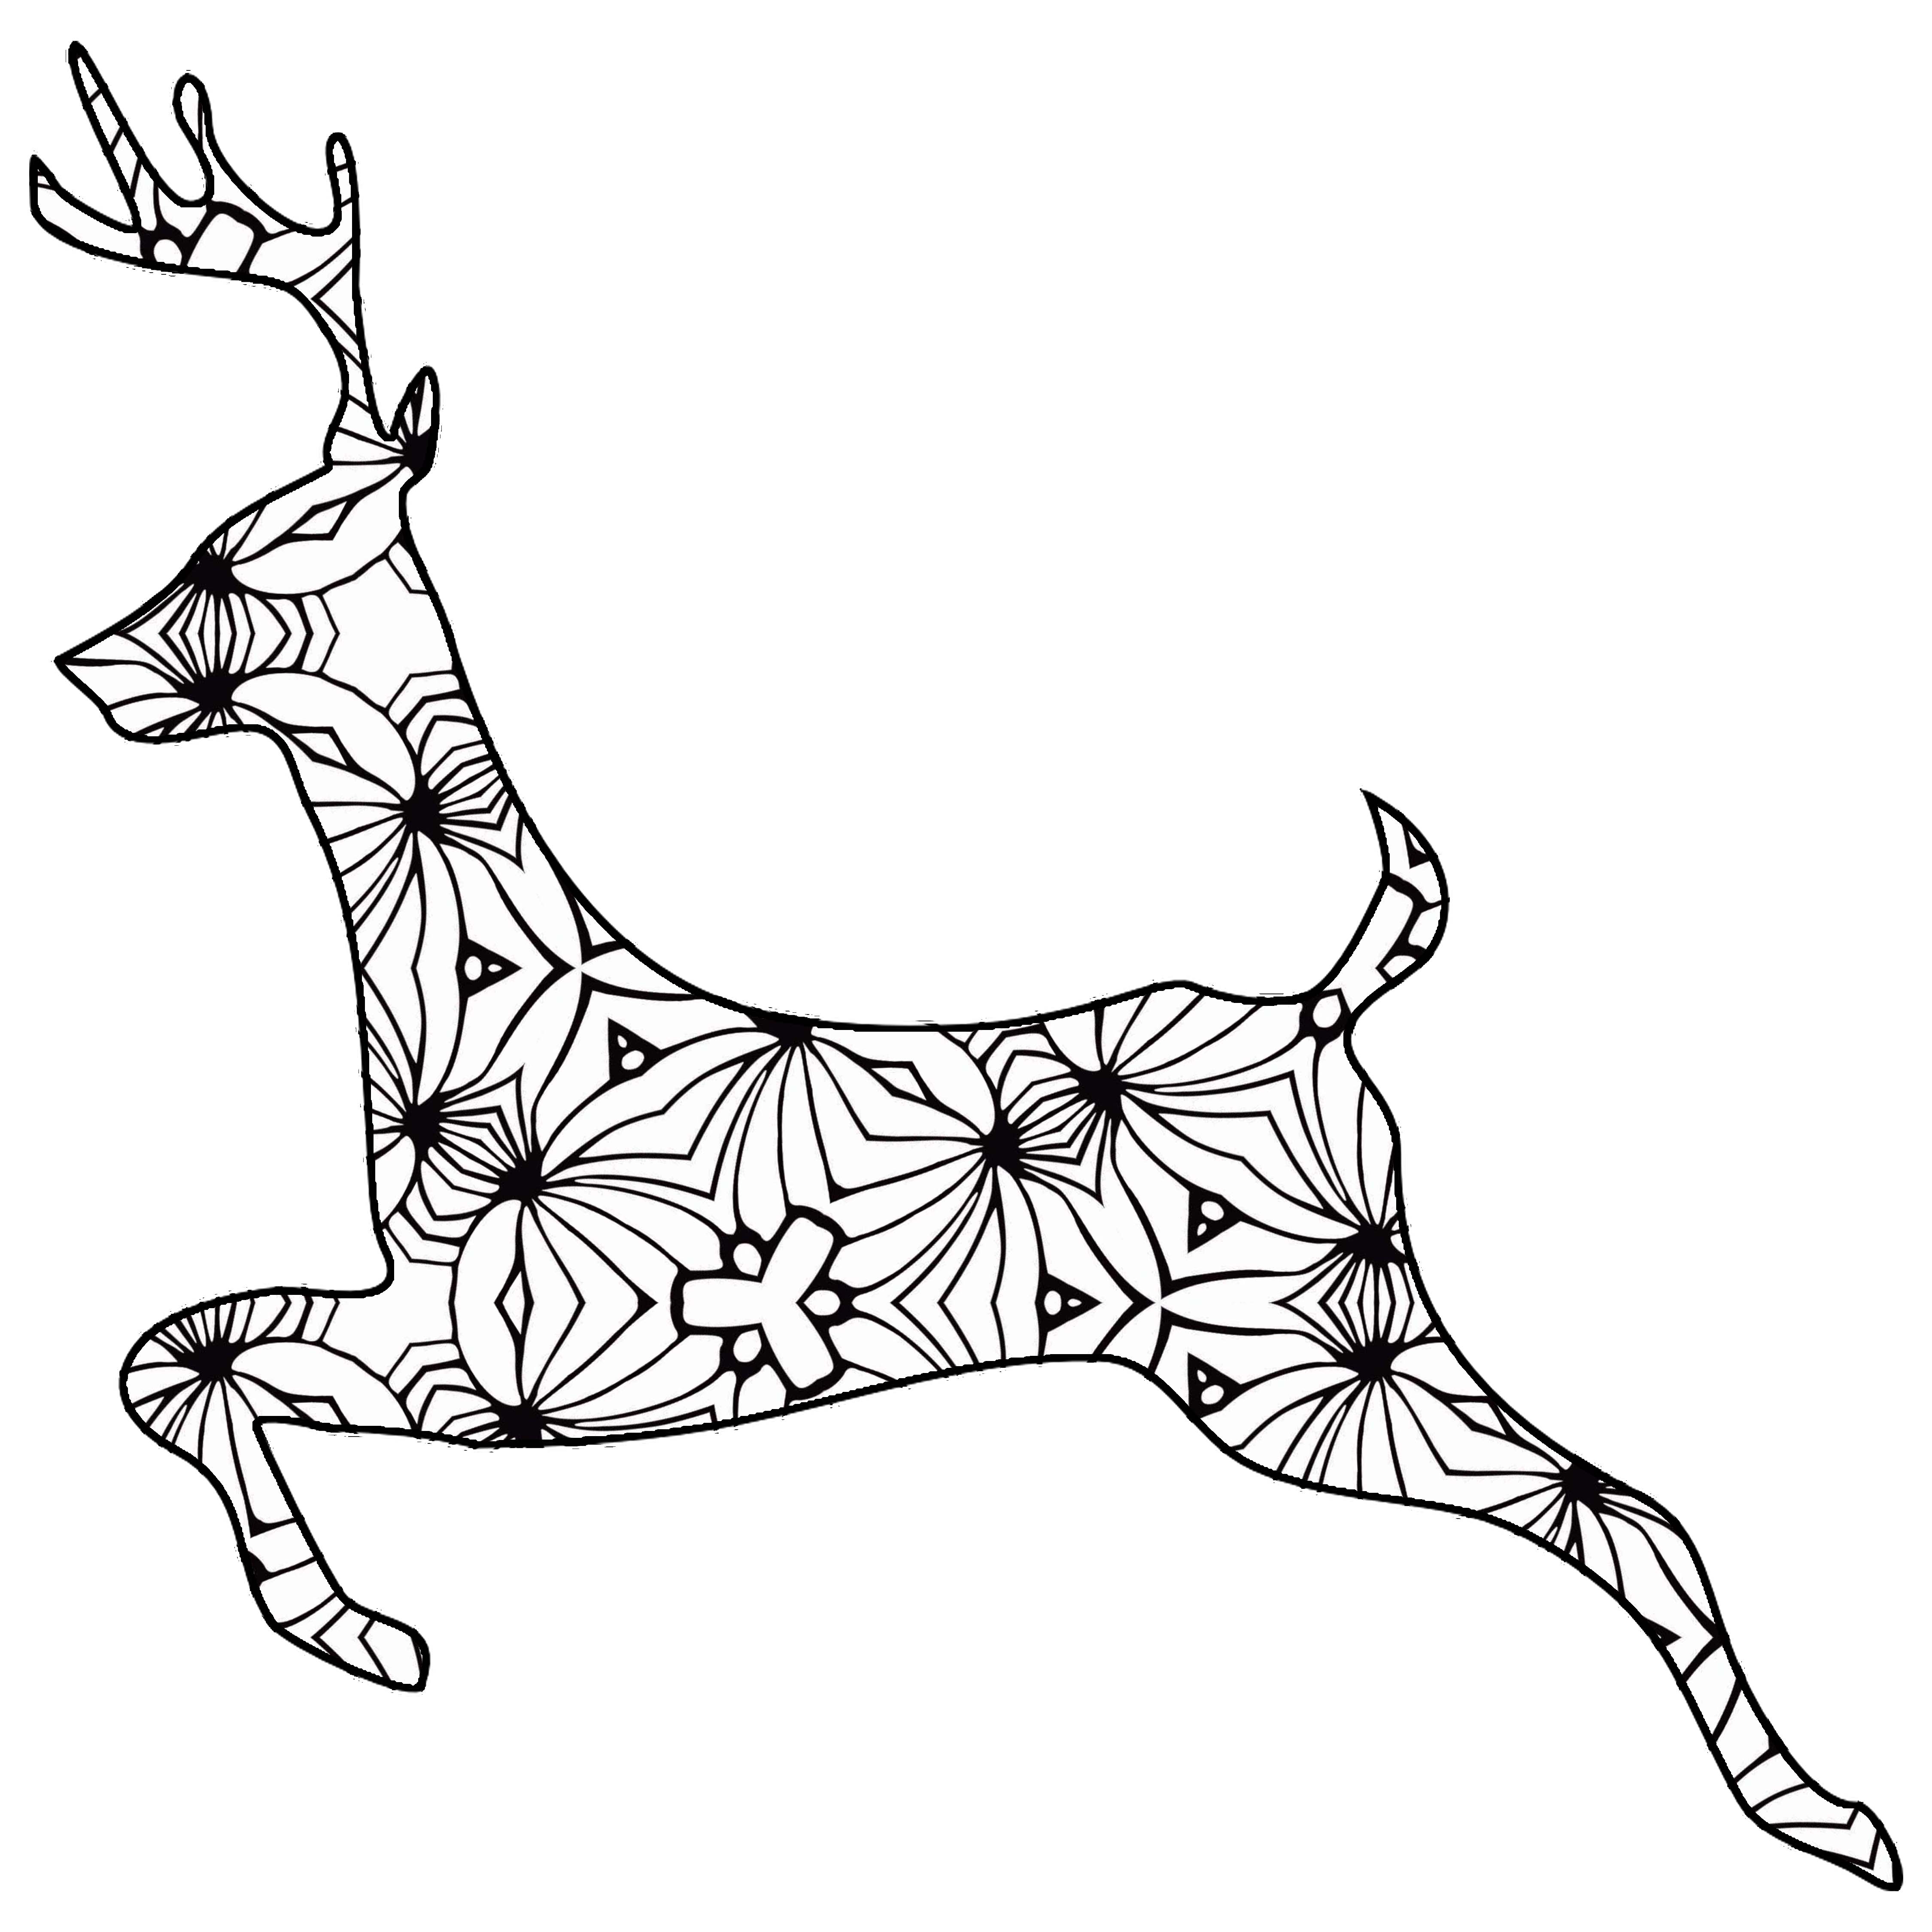 30 Free Printable Geometric Animal Coloring Pages The